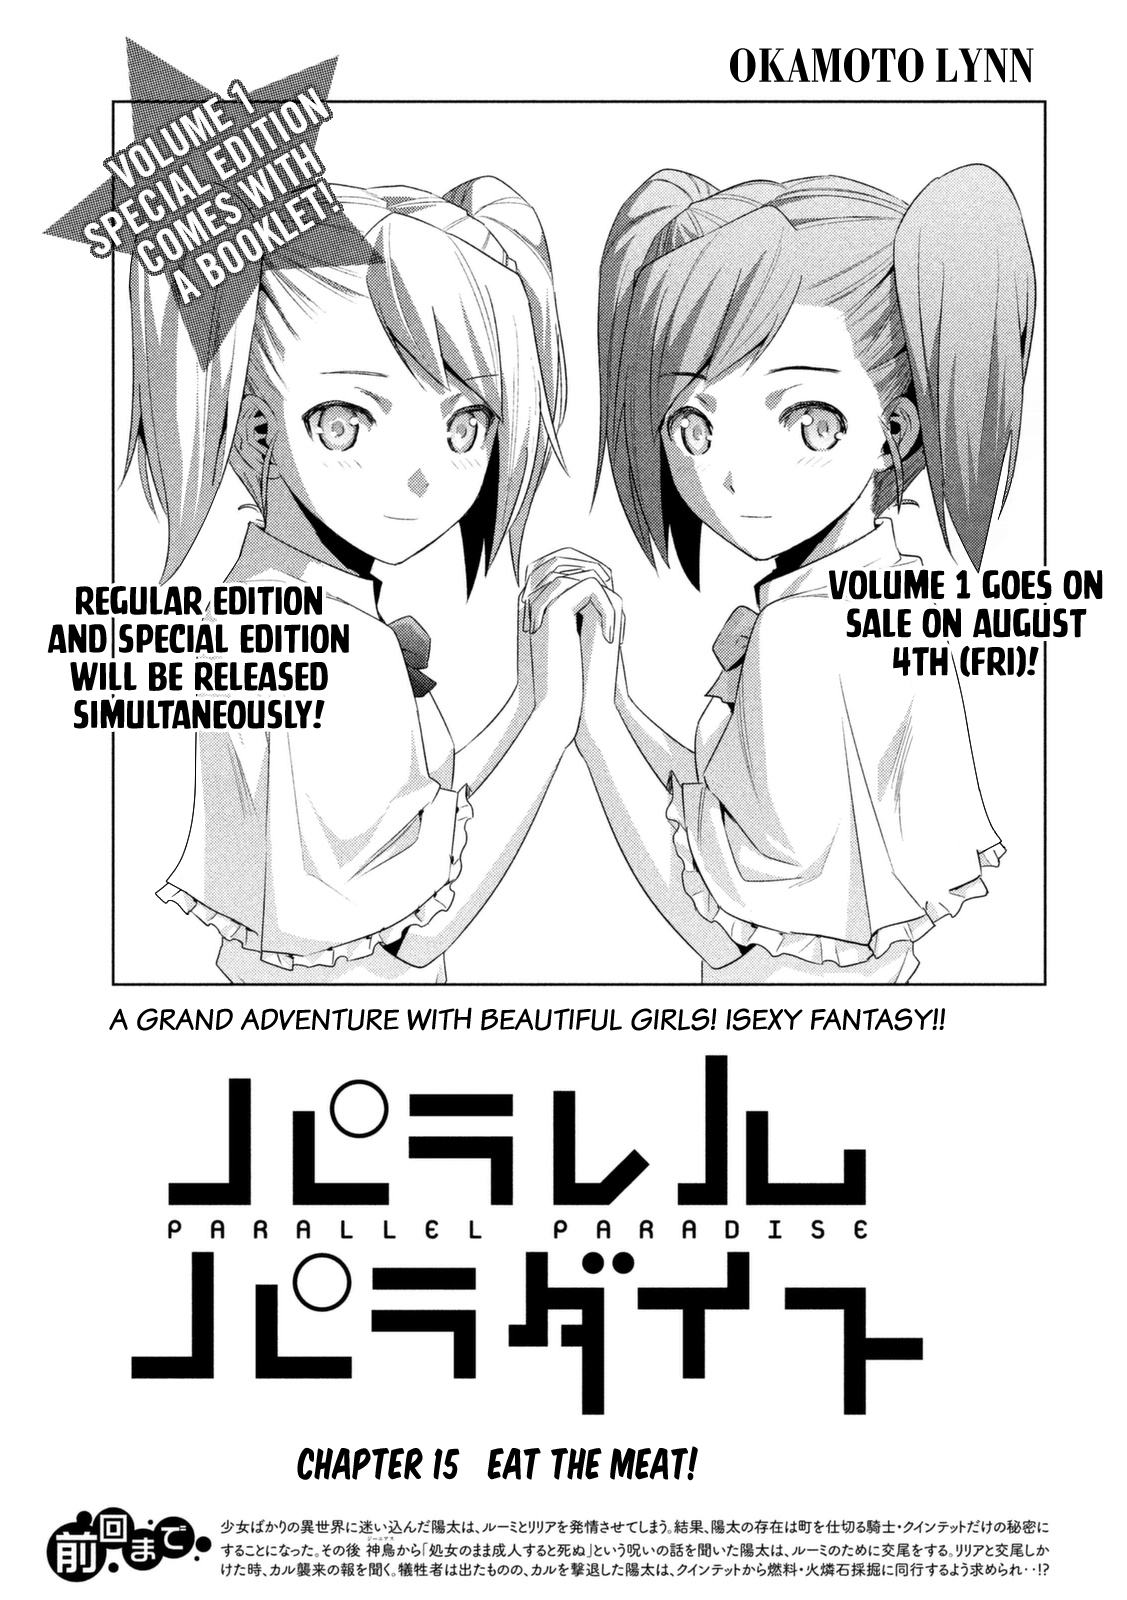 Parallel Paradise Vol.2 Chapter 15: Eat The Meat! - Picture 2